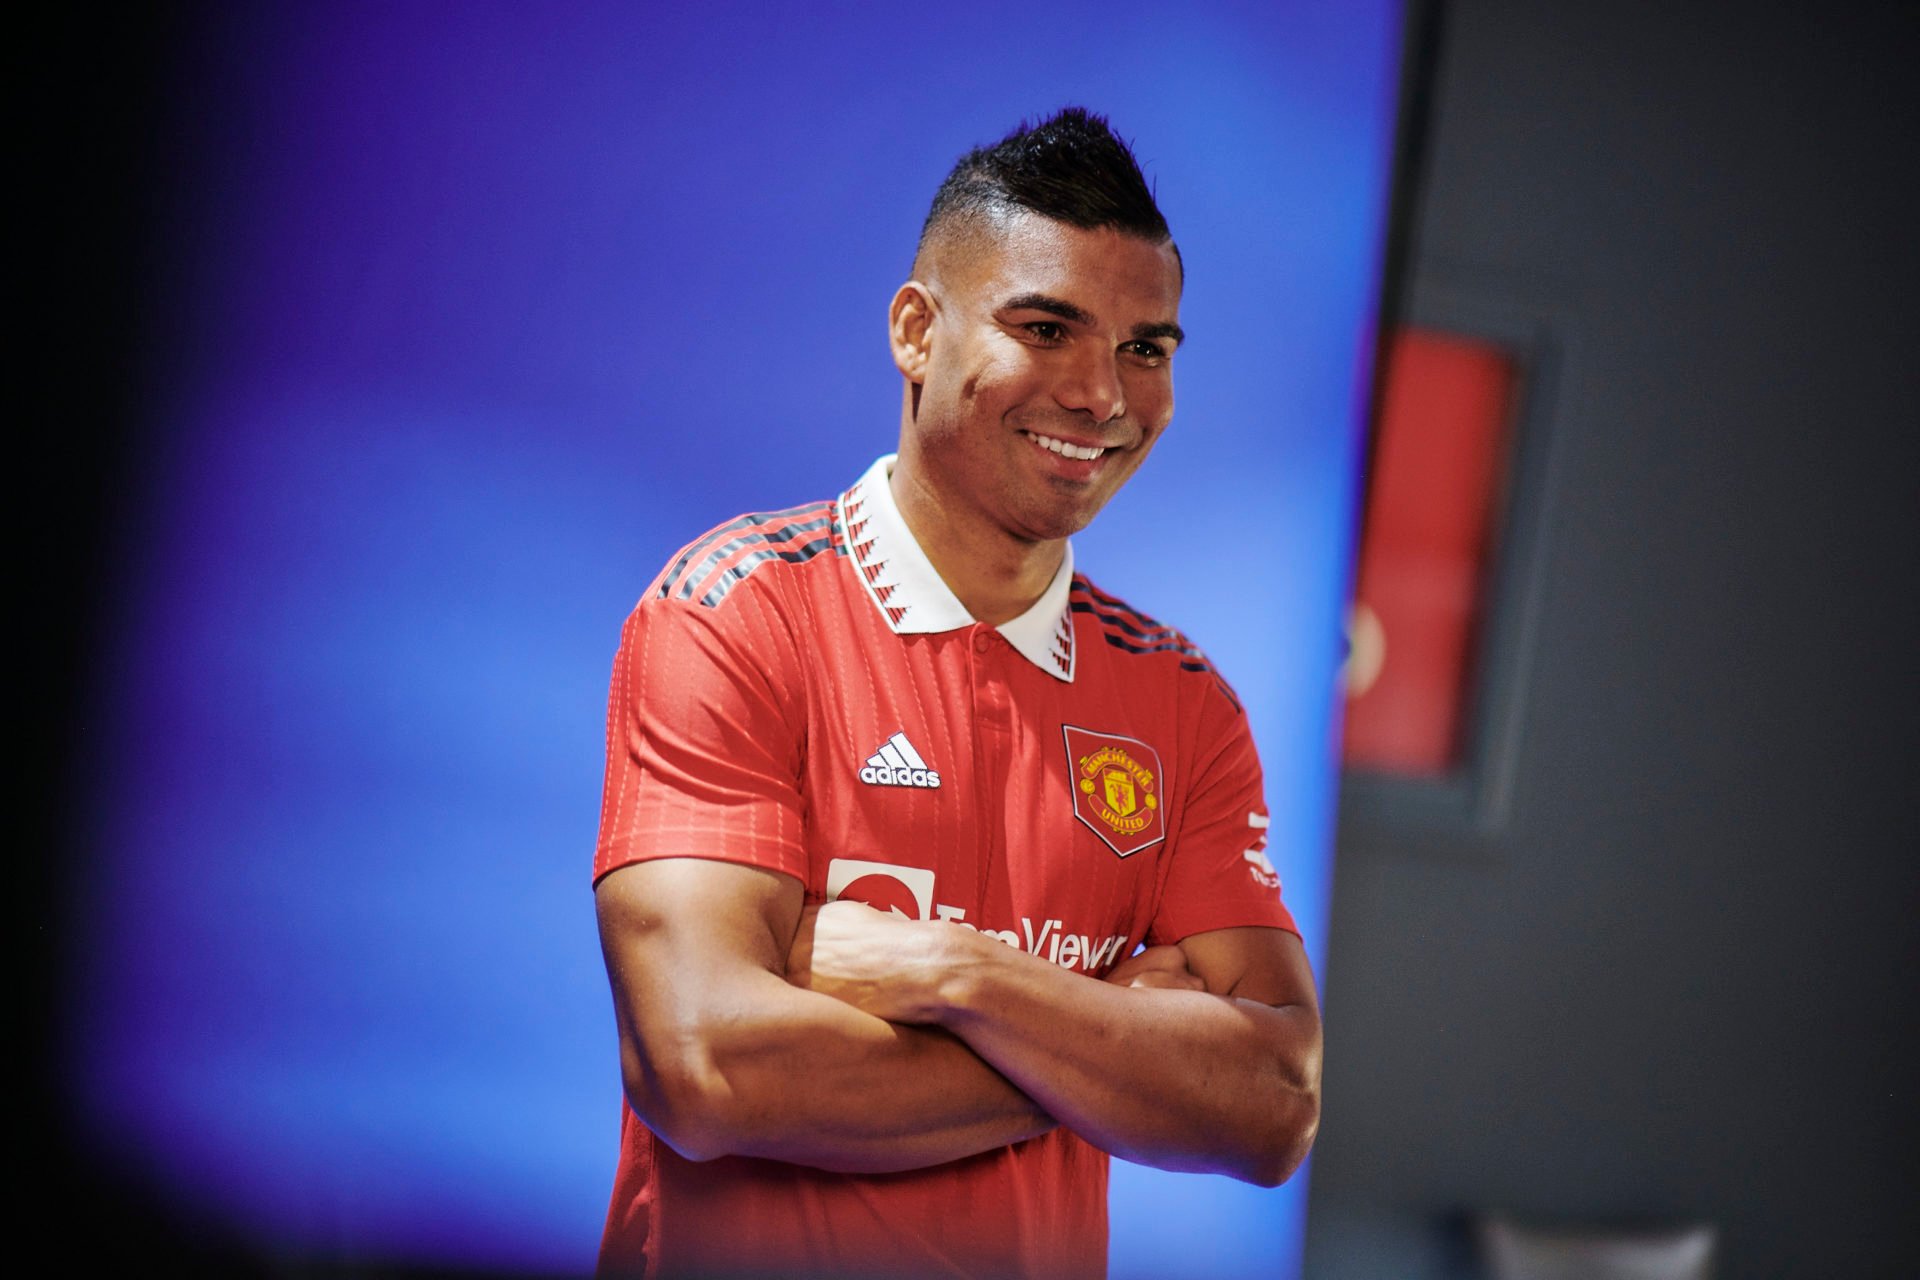 Photos: Casemiro pictured wearing Manchester United kit for first time